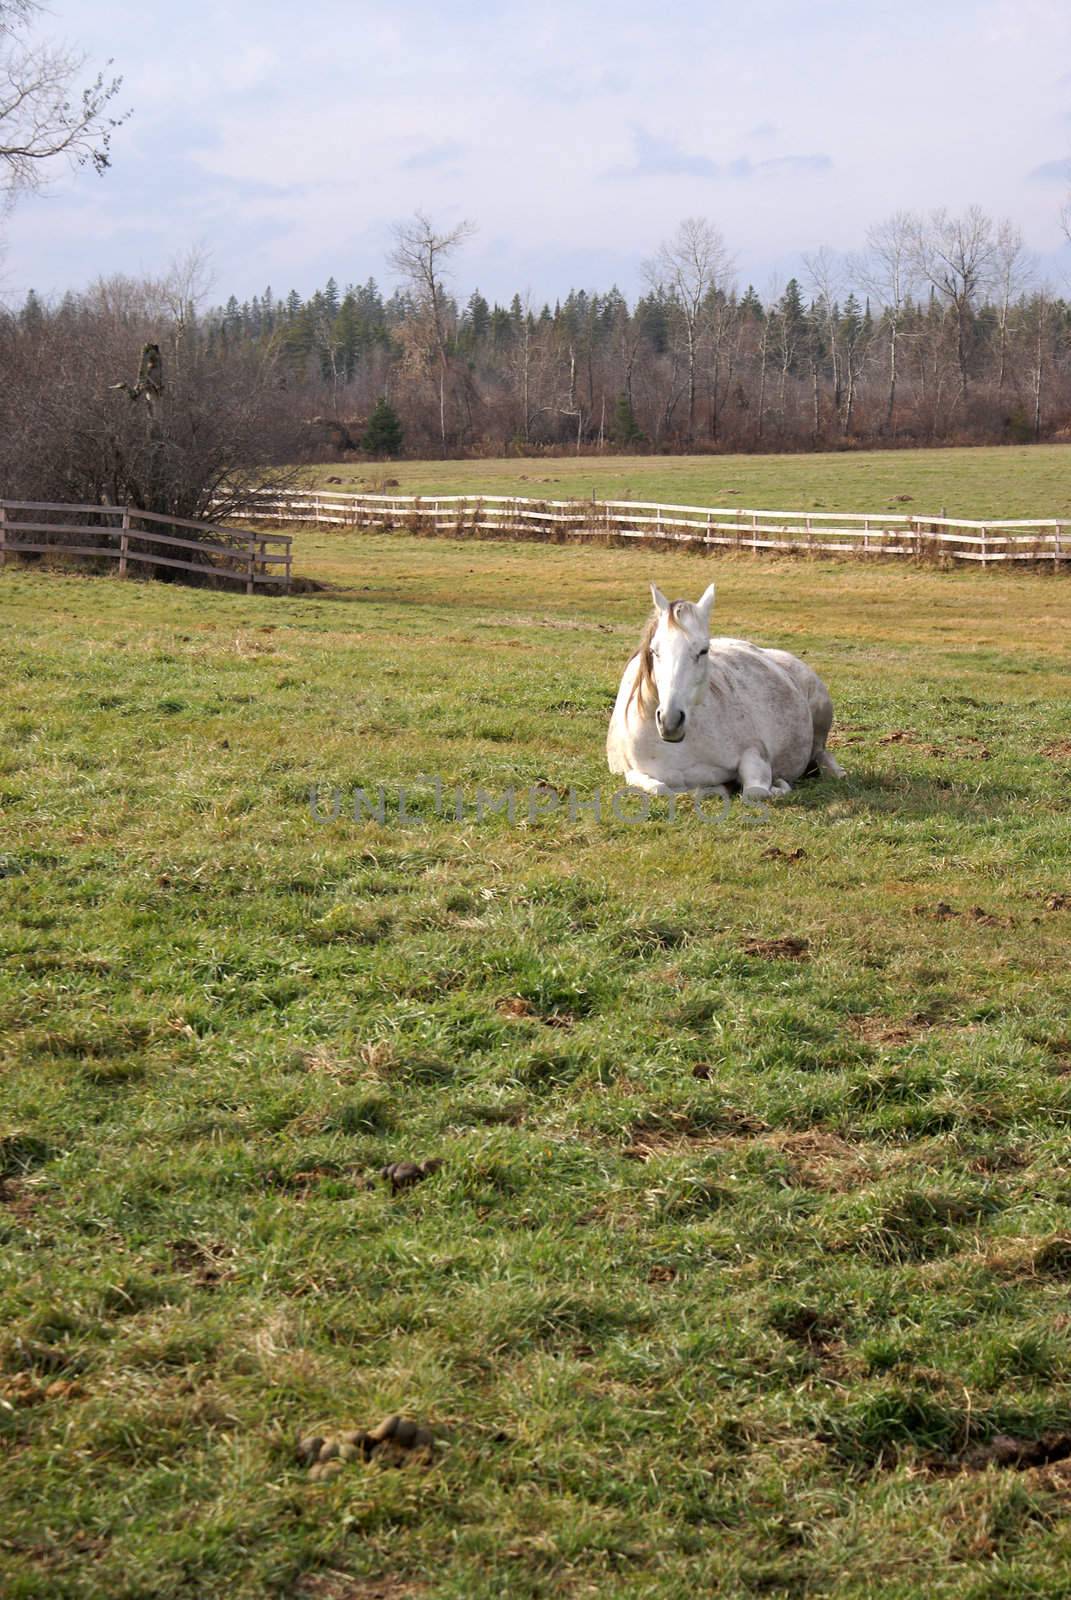 A beautiful white horse is sun bathing on the grass.